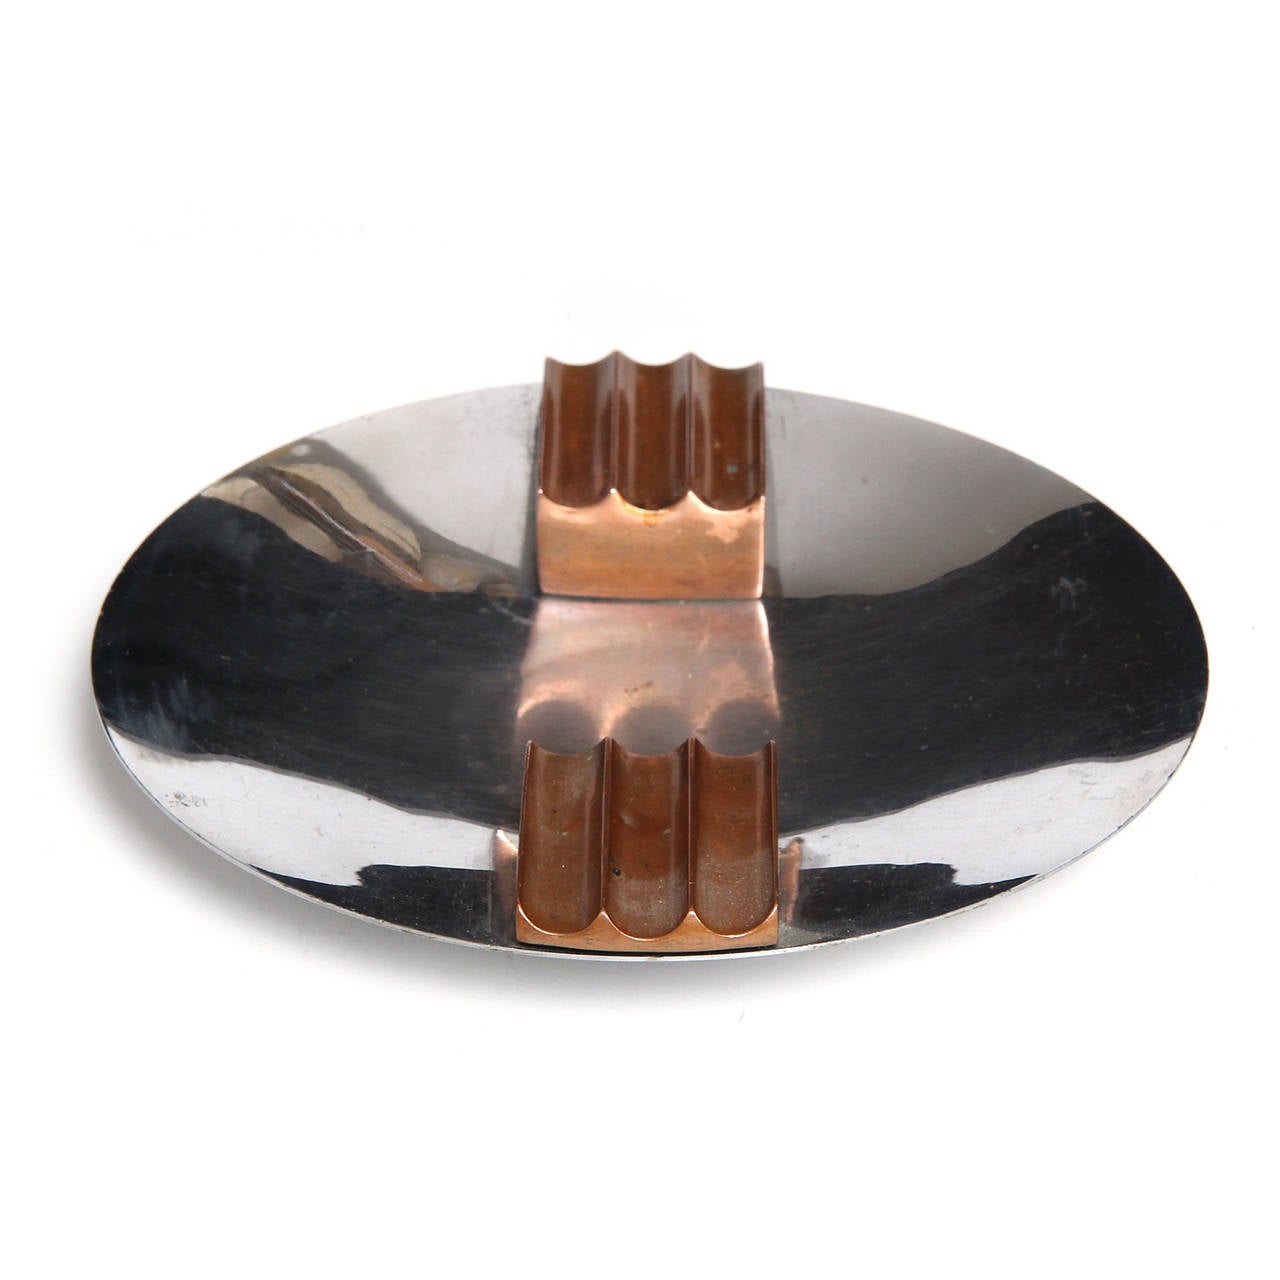 Machine Age modernist ashtray having a pair of fluted and angled copper cigarette rests floating in a shallow chromed steel disc.